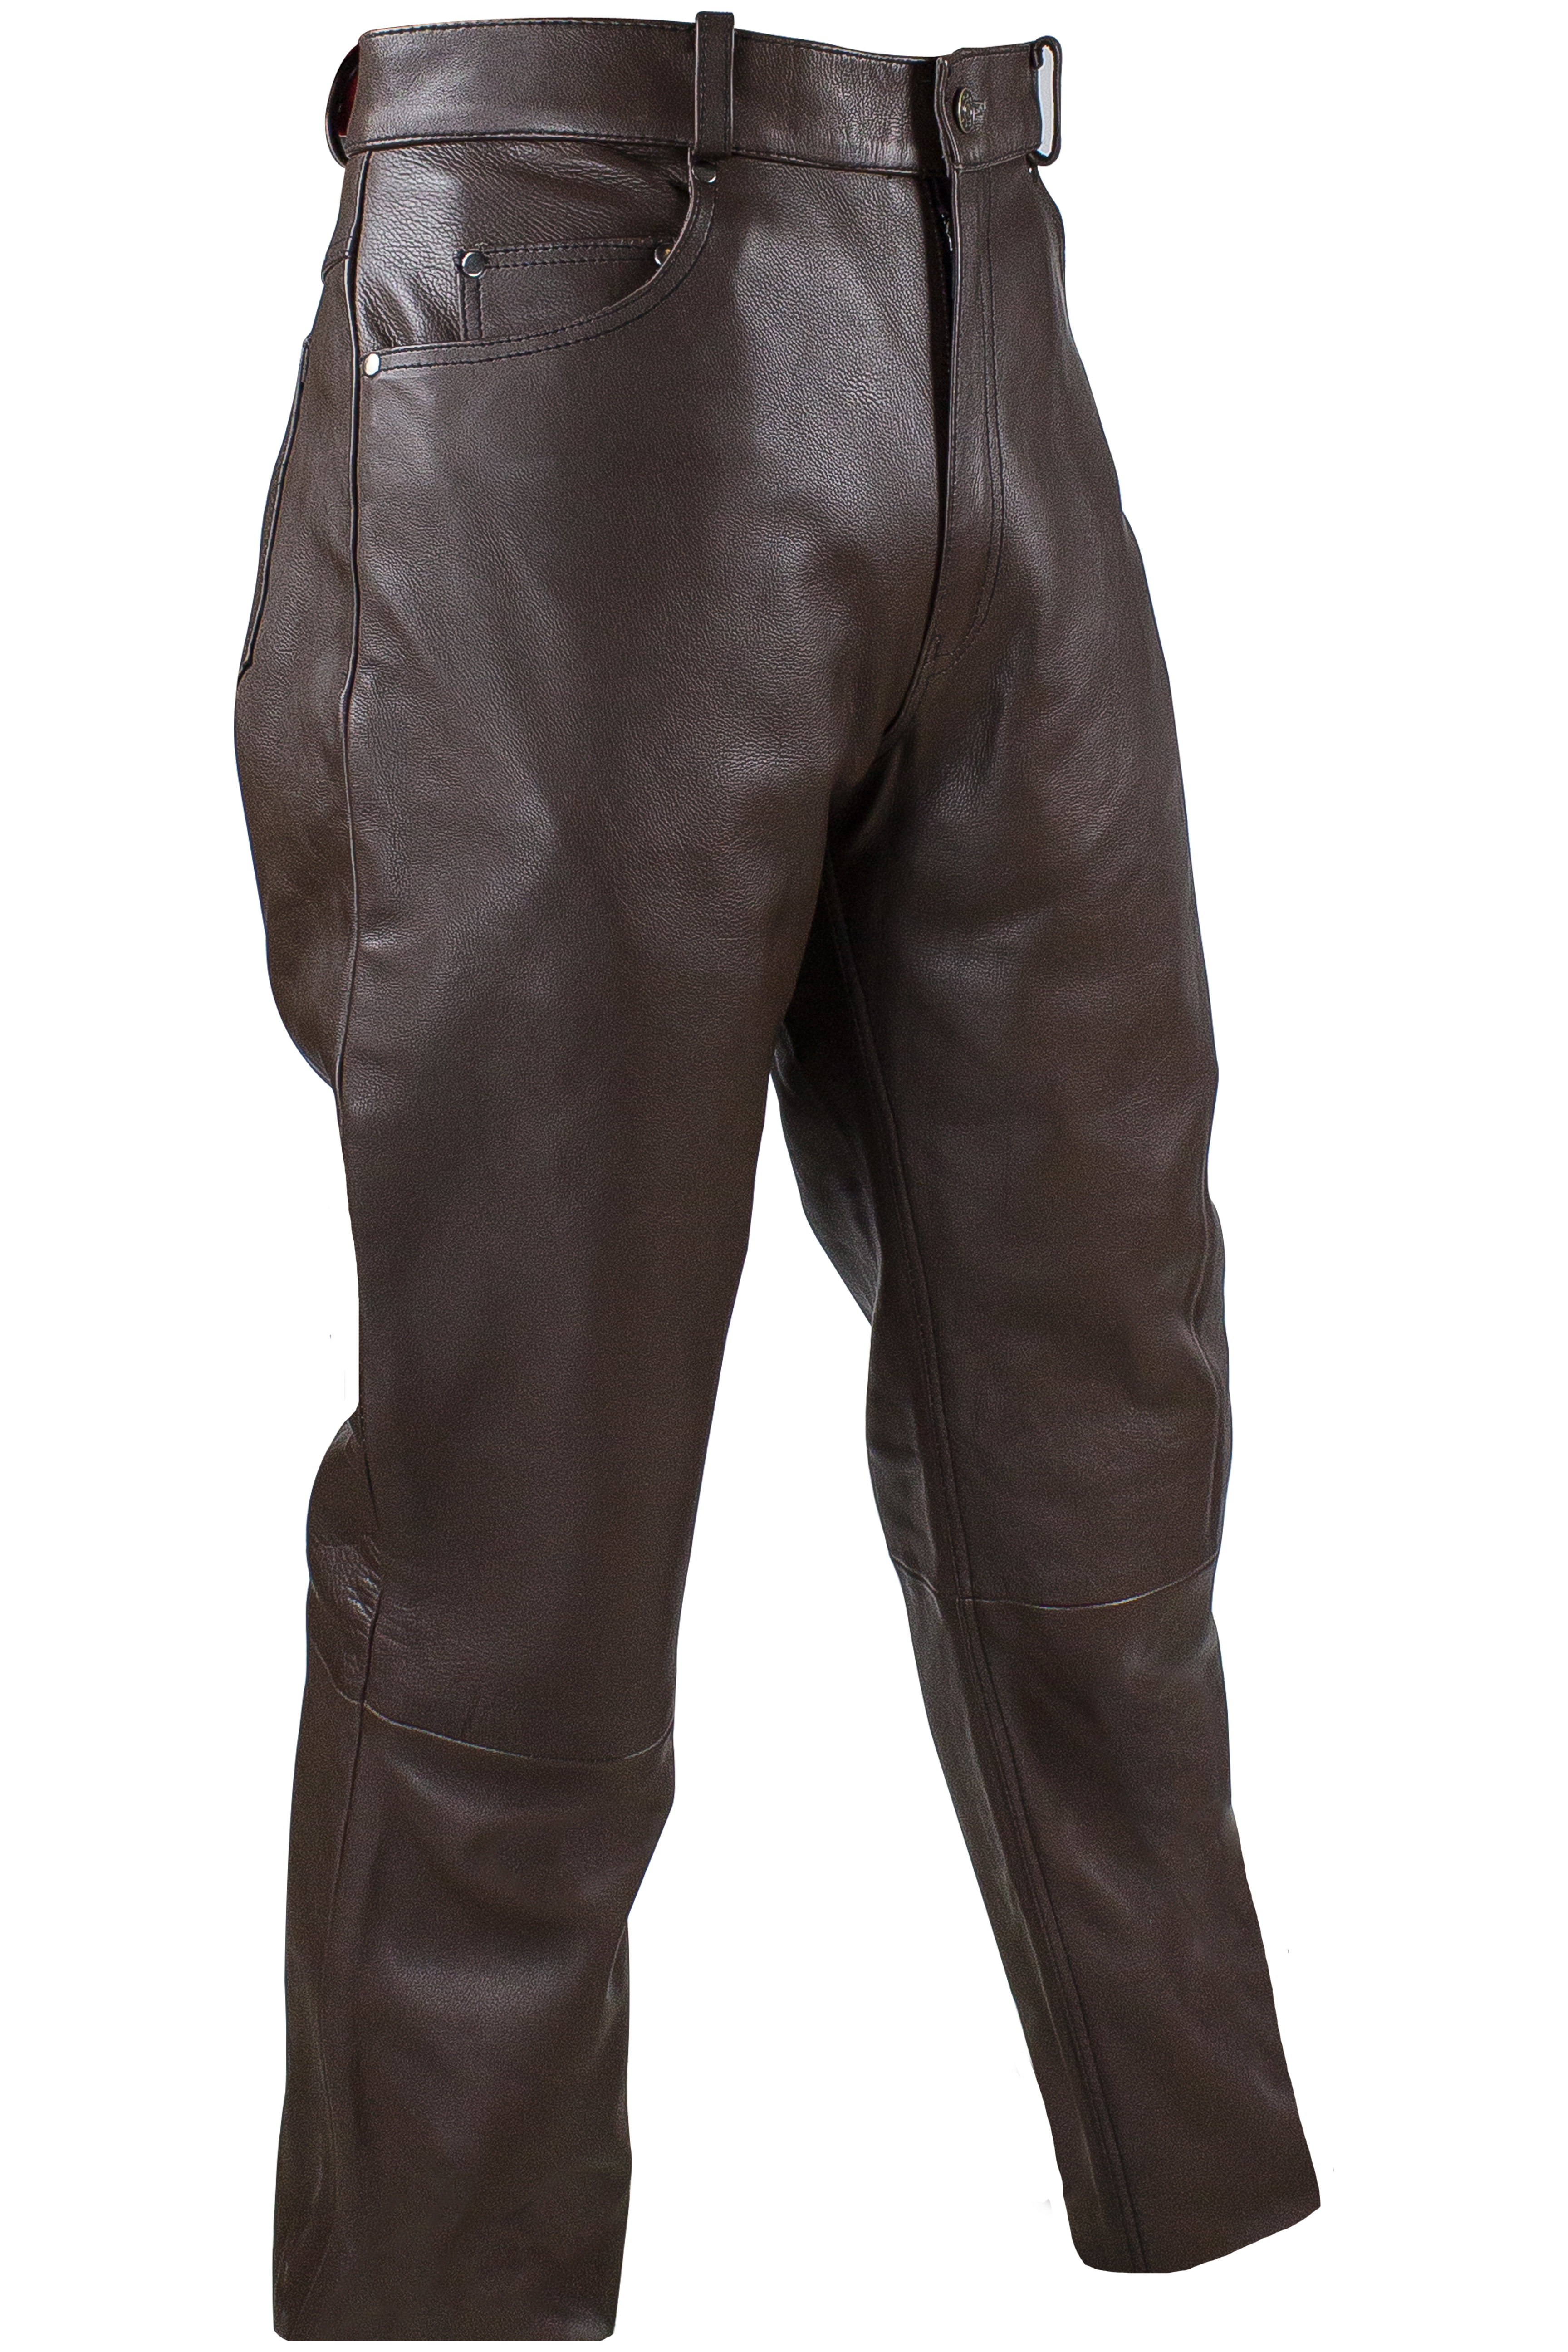 Men's Brown Leather Motorcycle Pants C500-12 - Open Road Leather &  Accessories